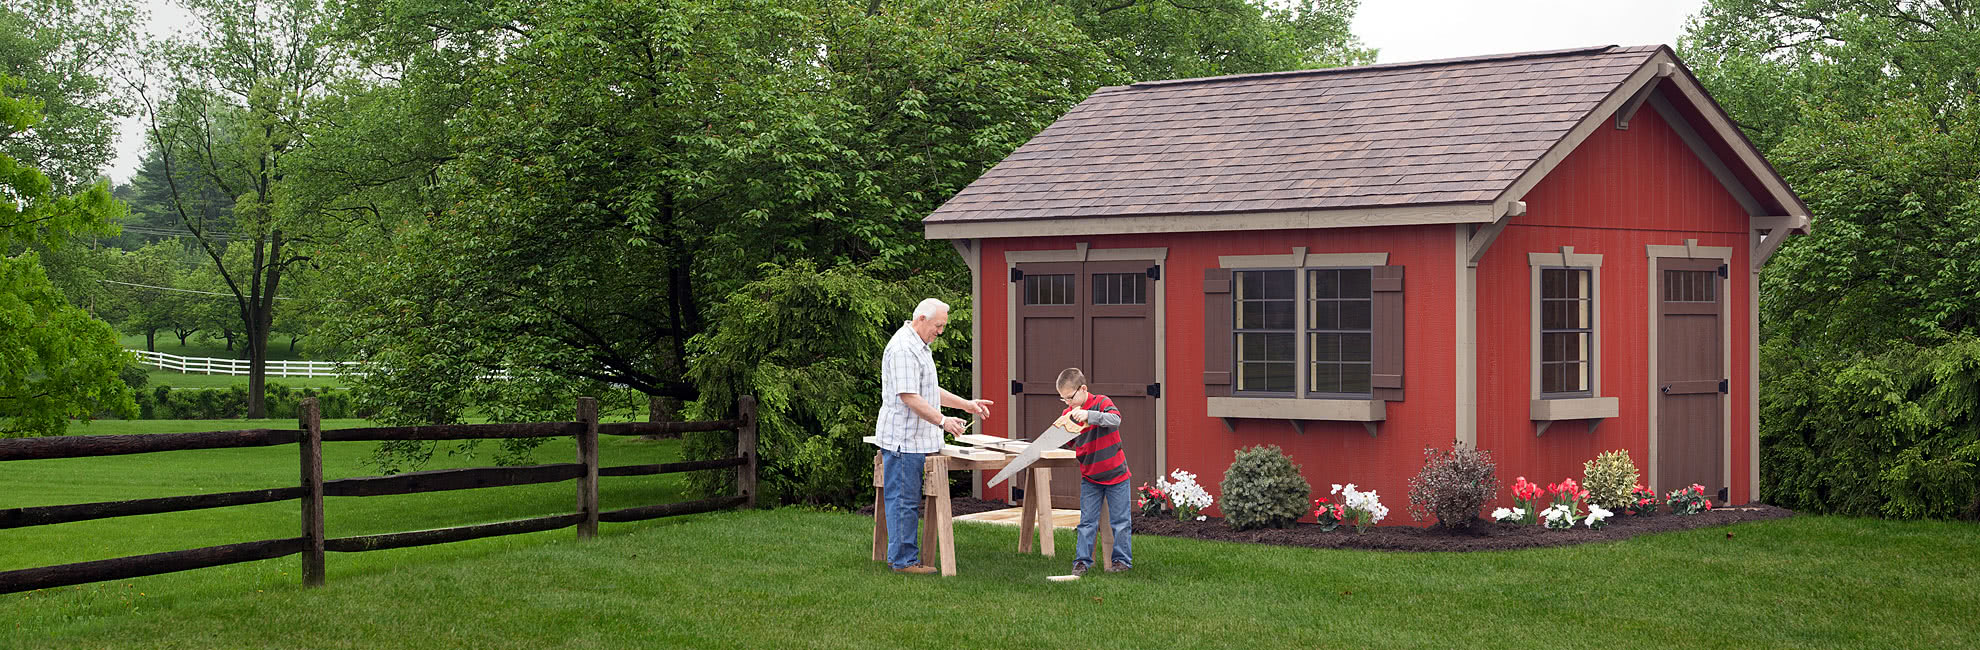 Amish Bulk Food and Deli - Pittsburgh Swing Sets and Amish Lawn Furniture